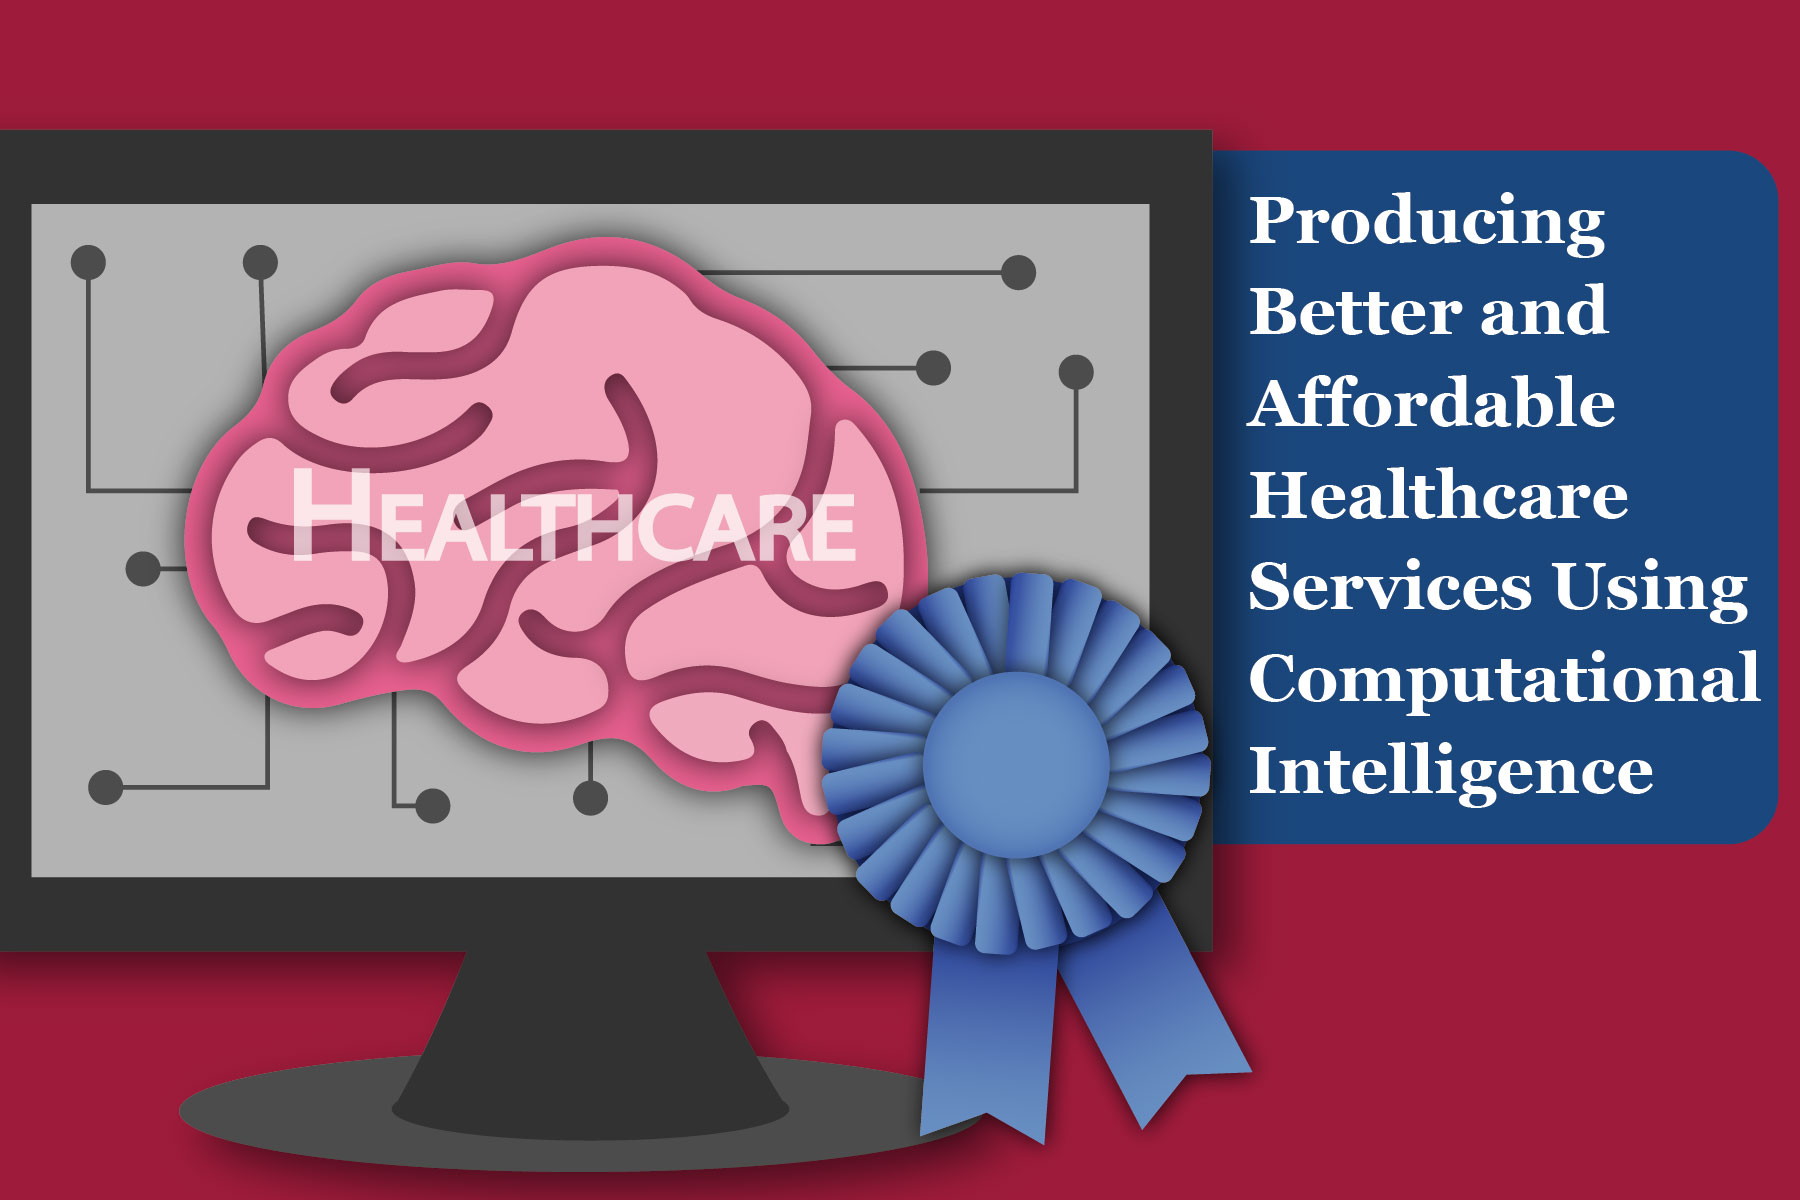 Affordable healthcare services as well as improved using computational intelligence